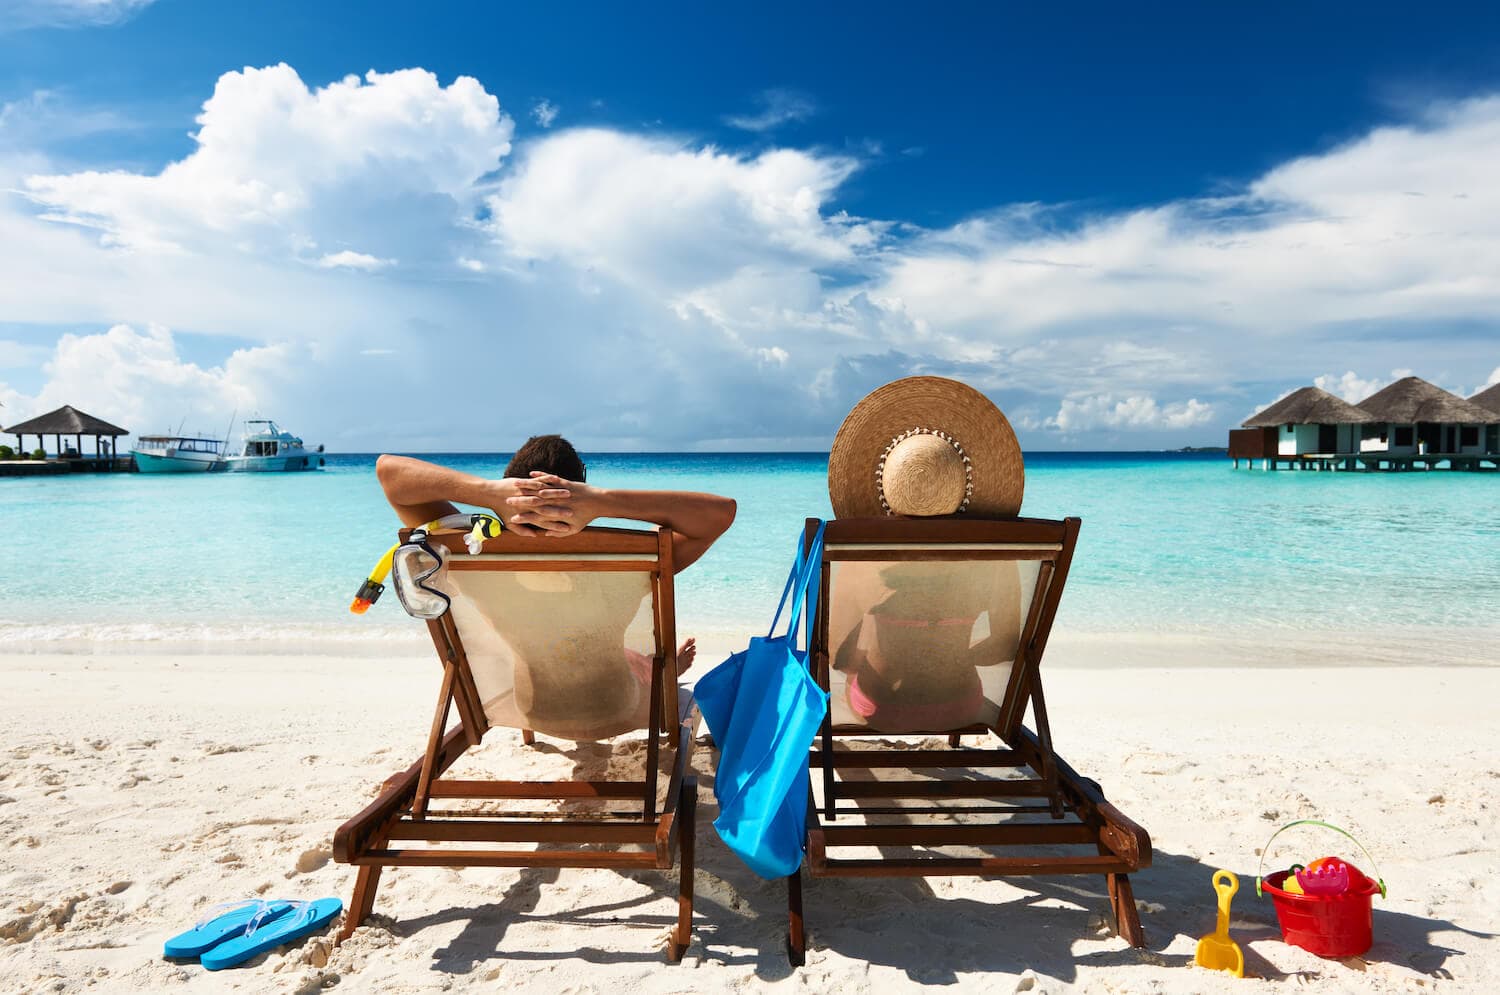 A man and woman sitting on beach chairs looking towards the ocean.